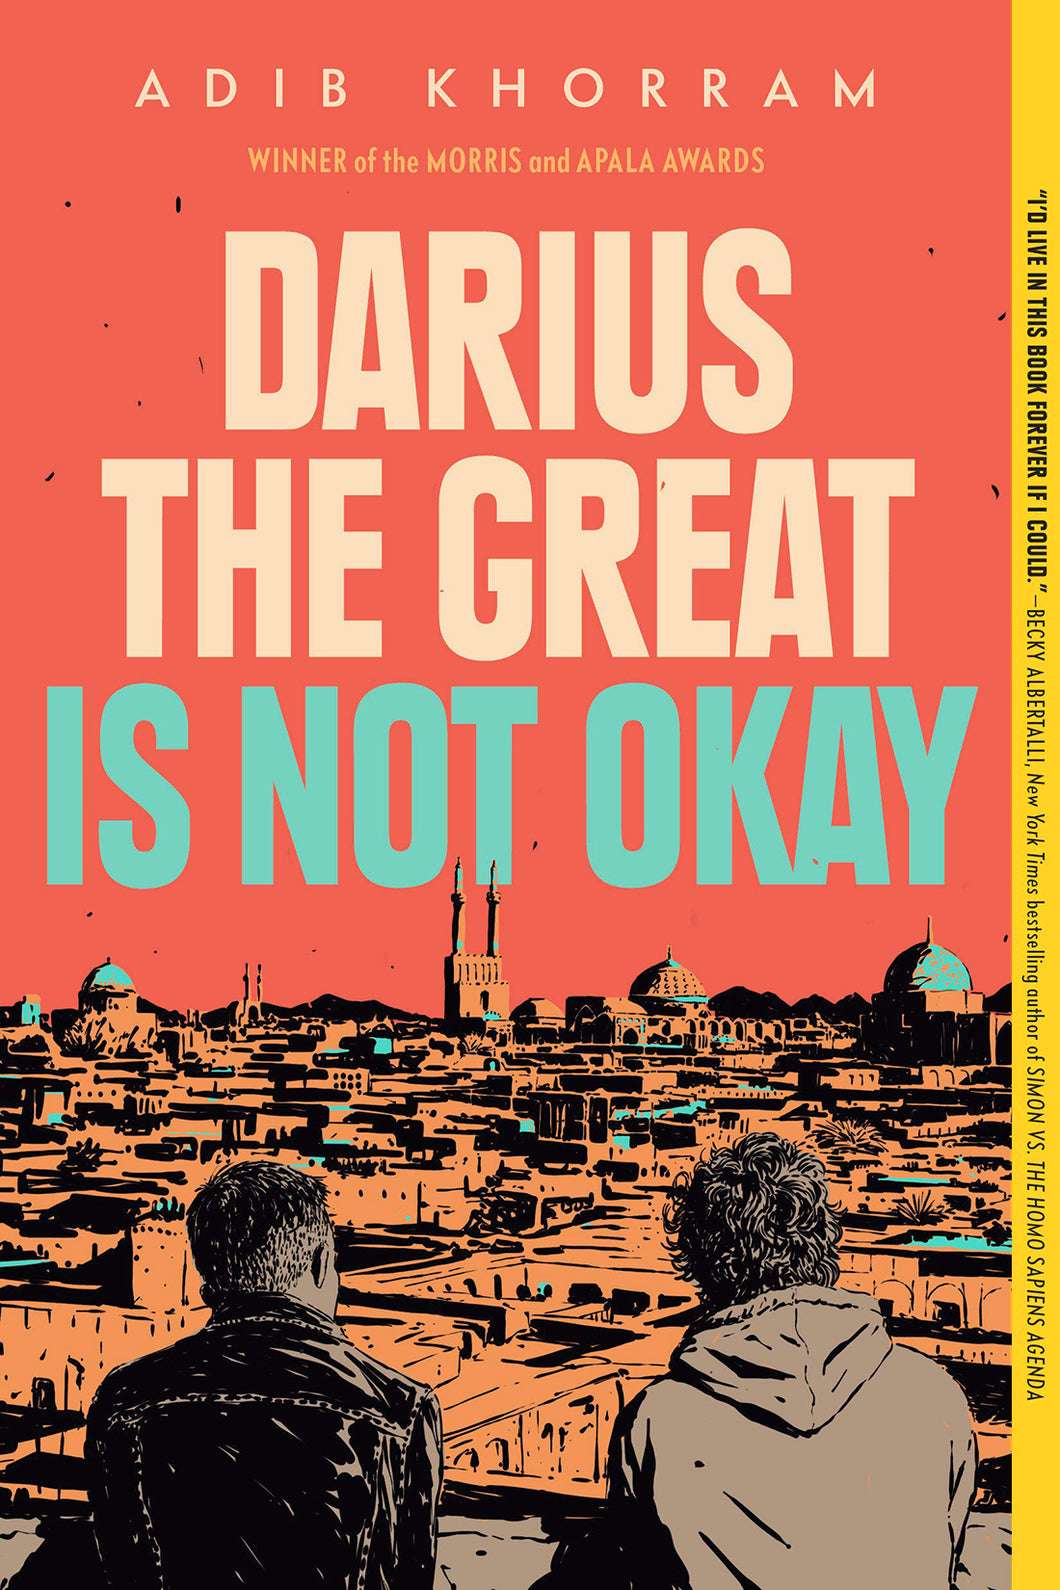 Darius the Great Is Not Okay by Adib Khorram / Hardcover or Paperback - NEW BOOK